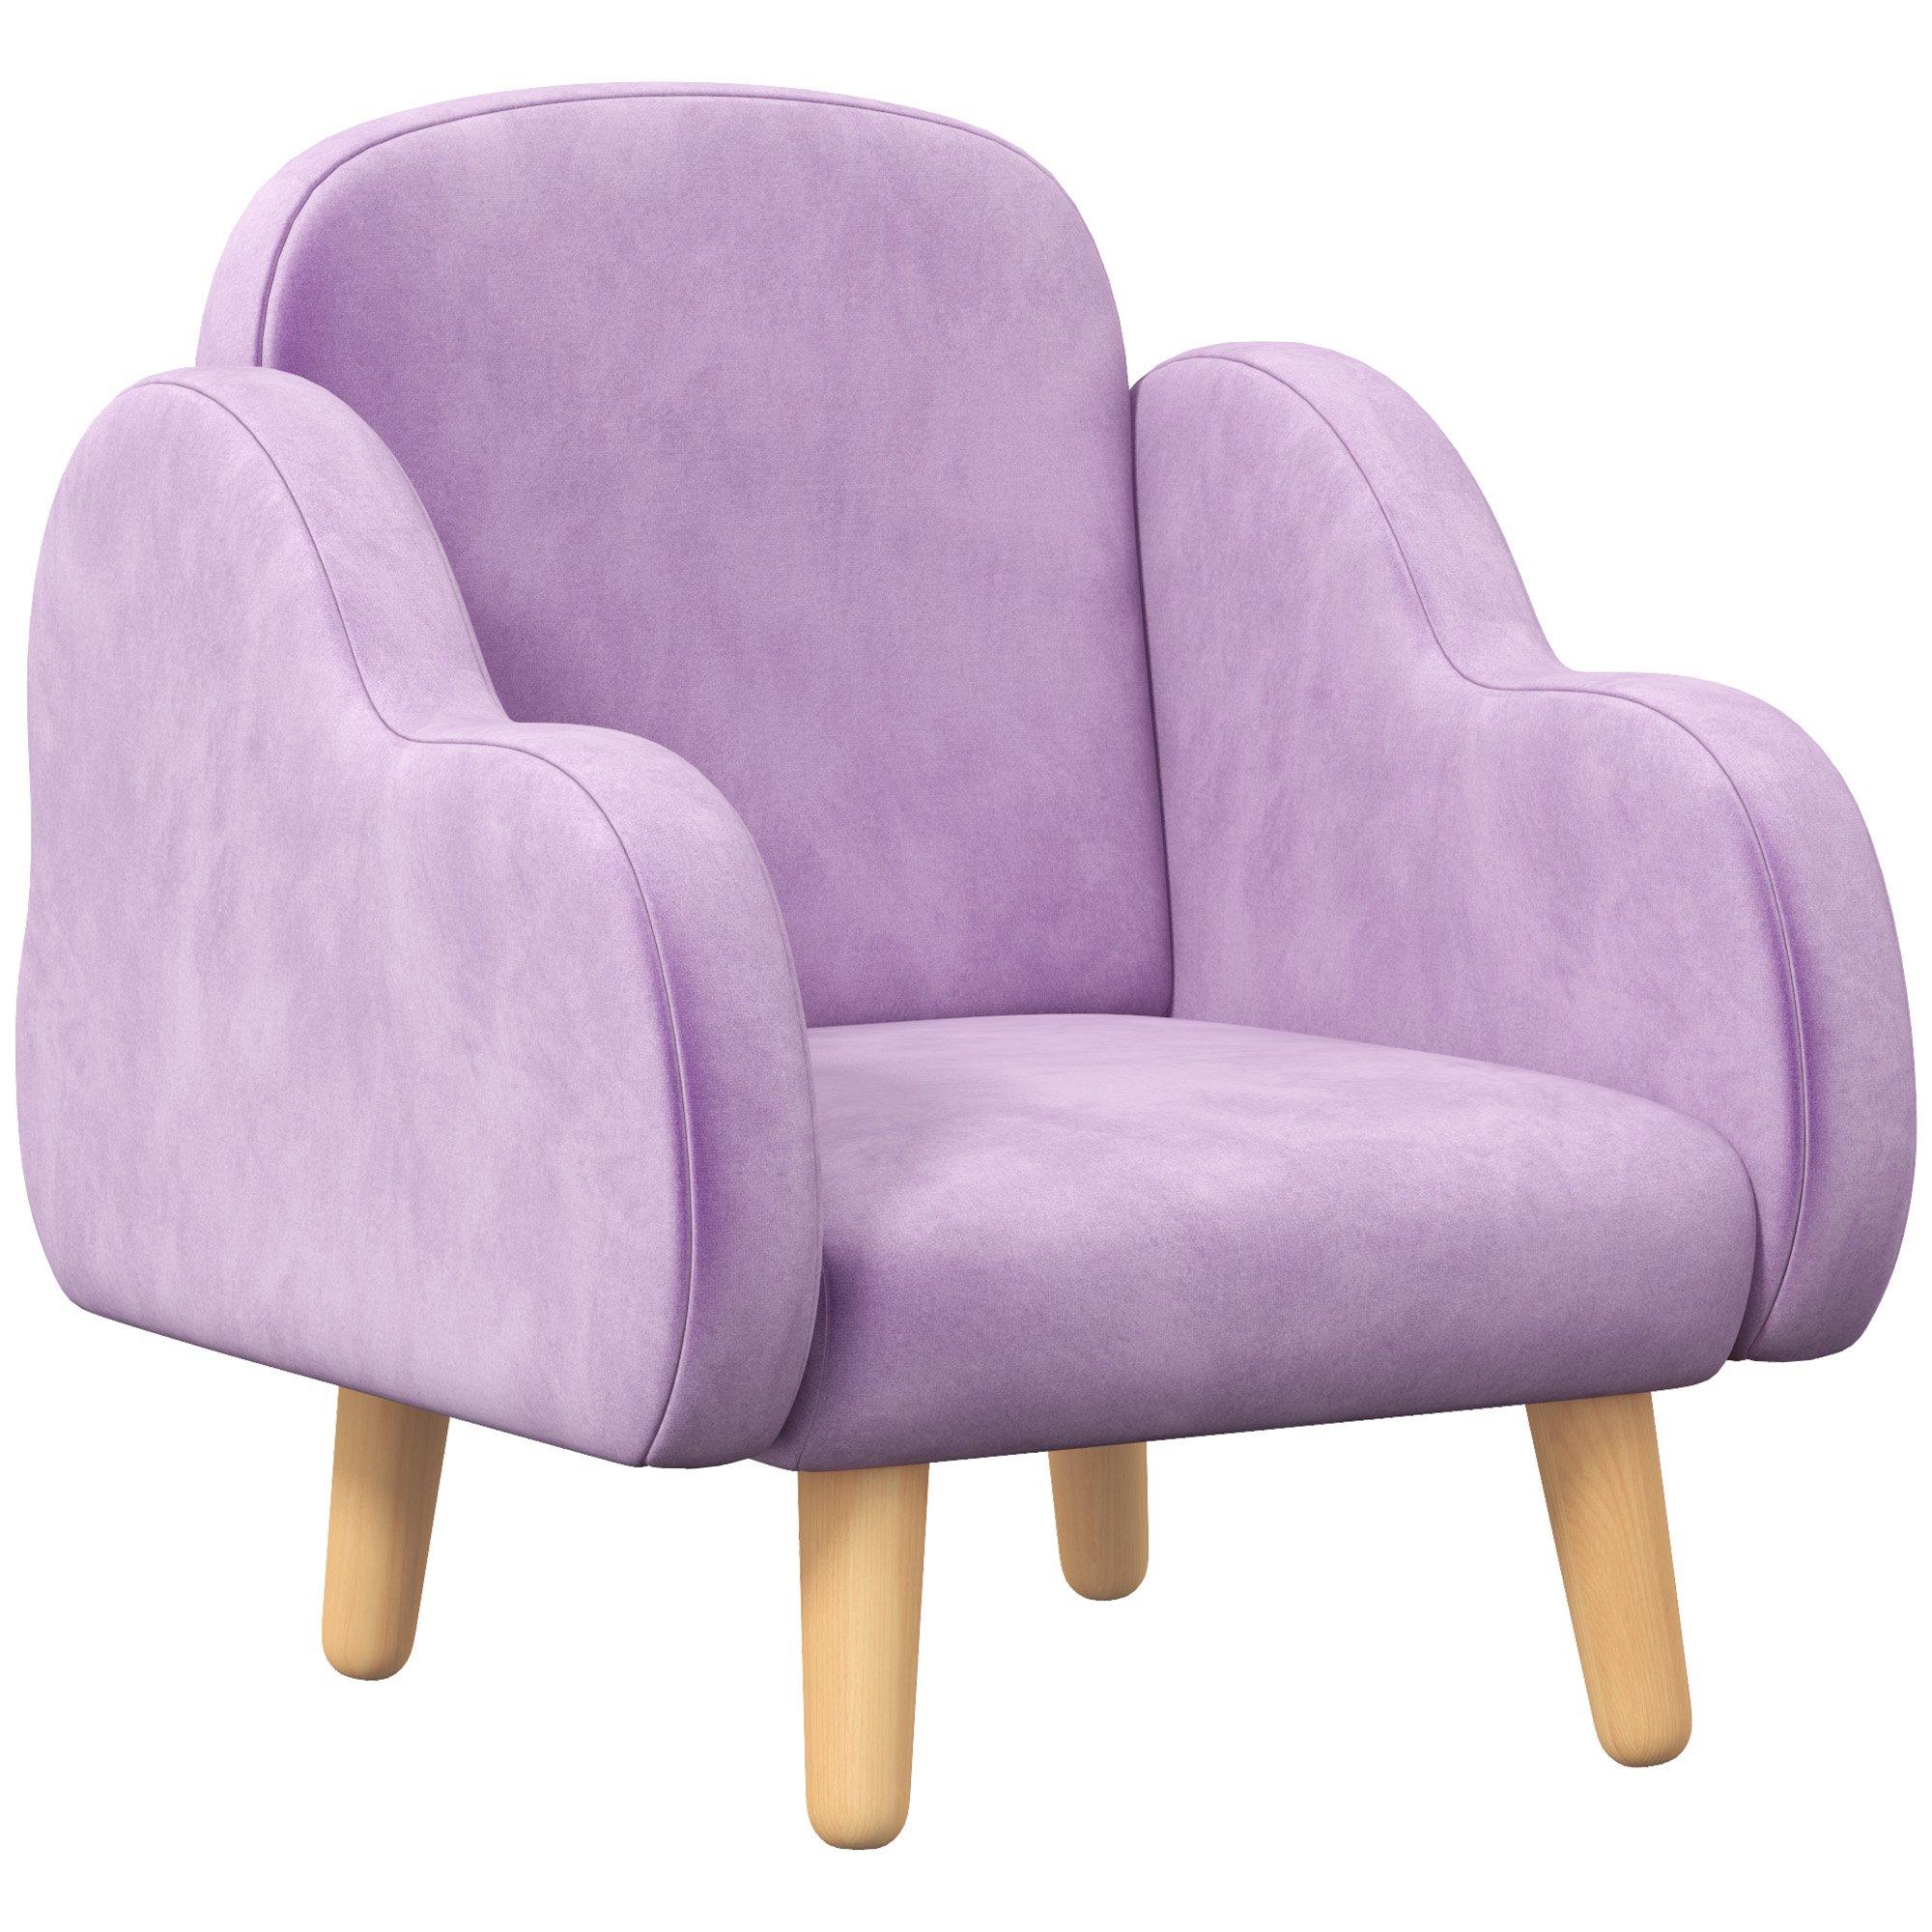 Cloud-Shaped Toddler Armchair, Mini Chair for Playroom, Bedroom